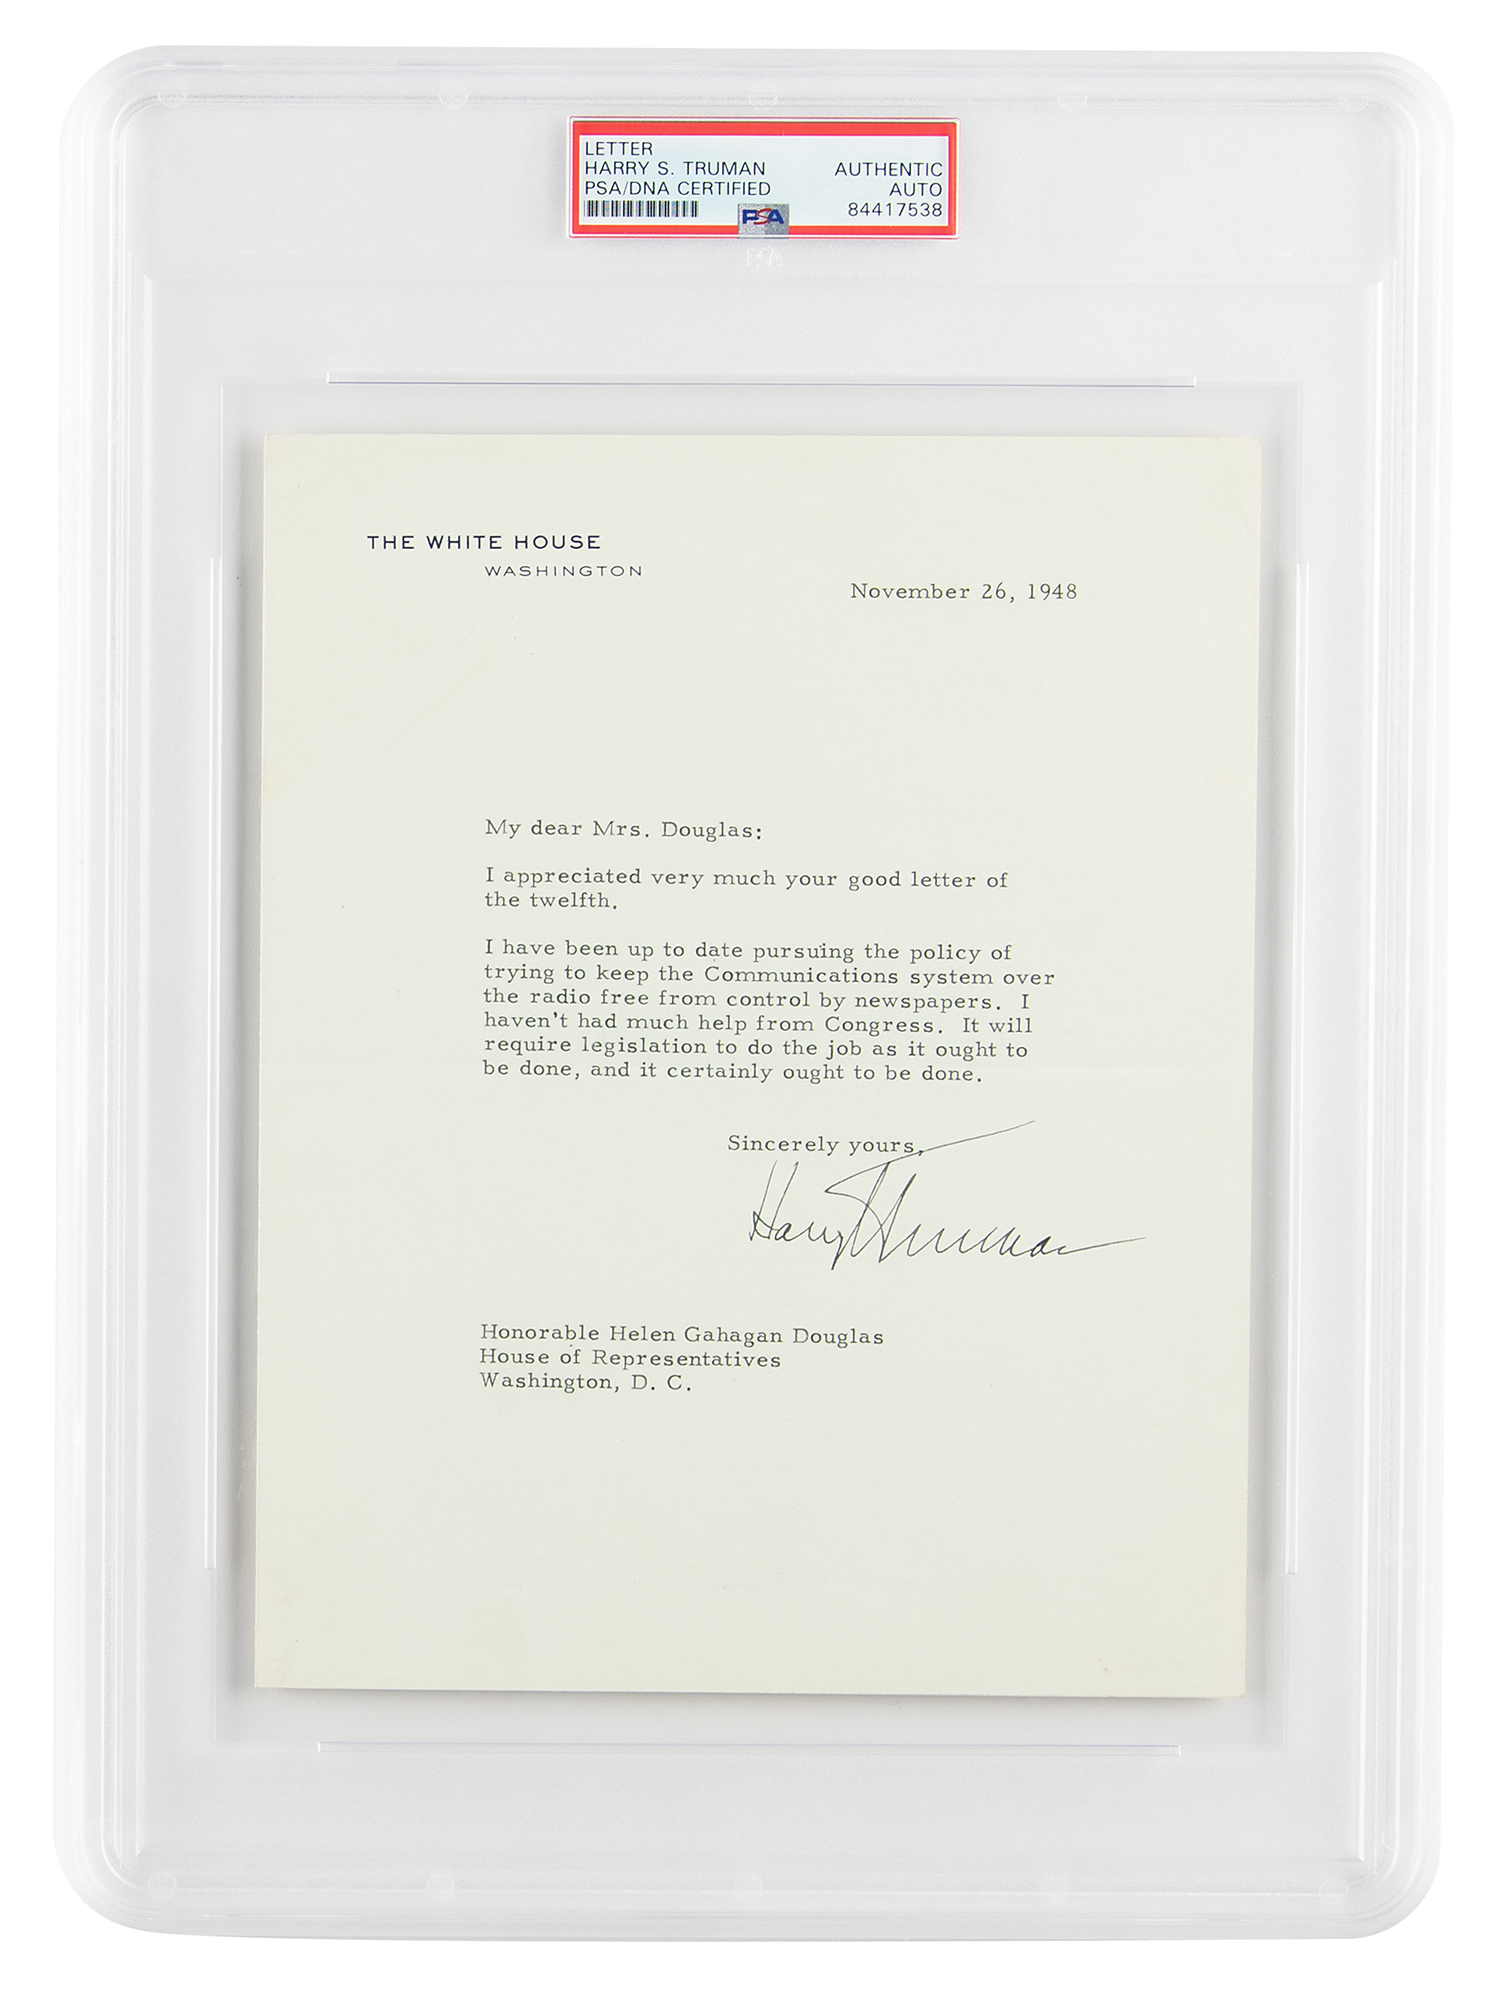 Lot #6044 Harry S. Truman Typed Letter Signed as President